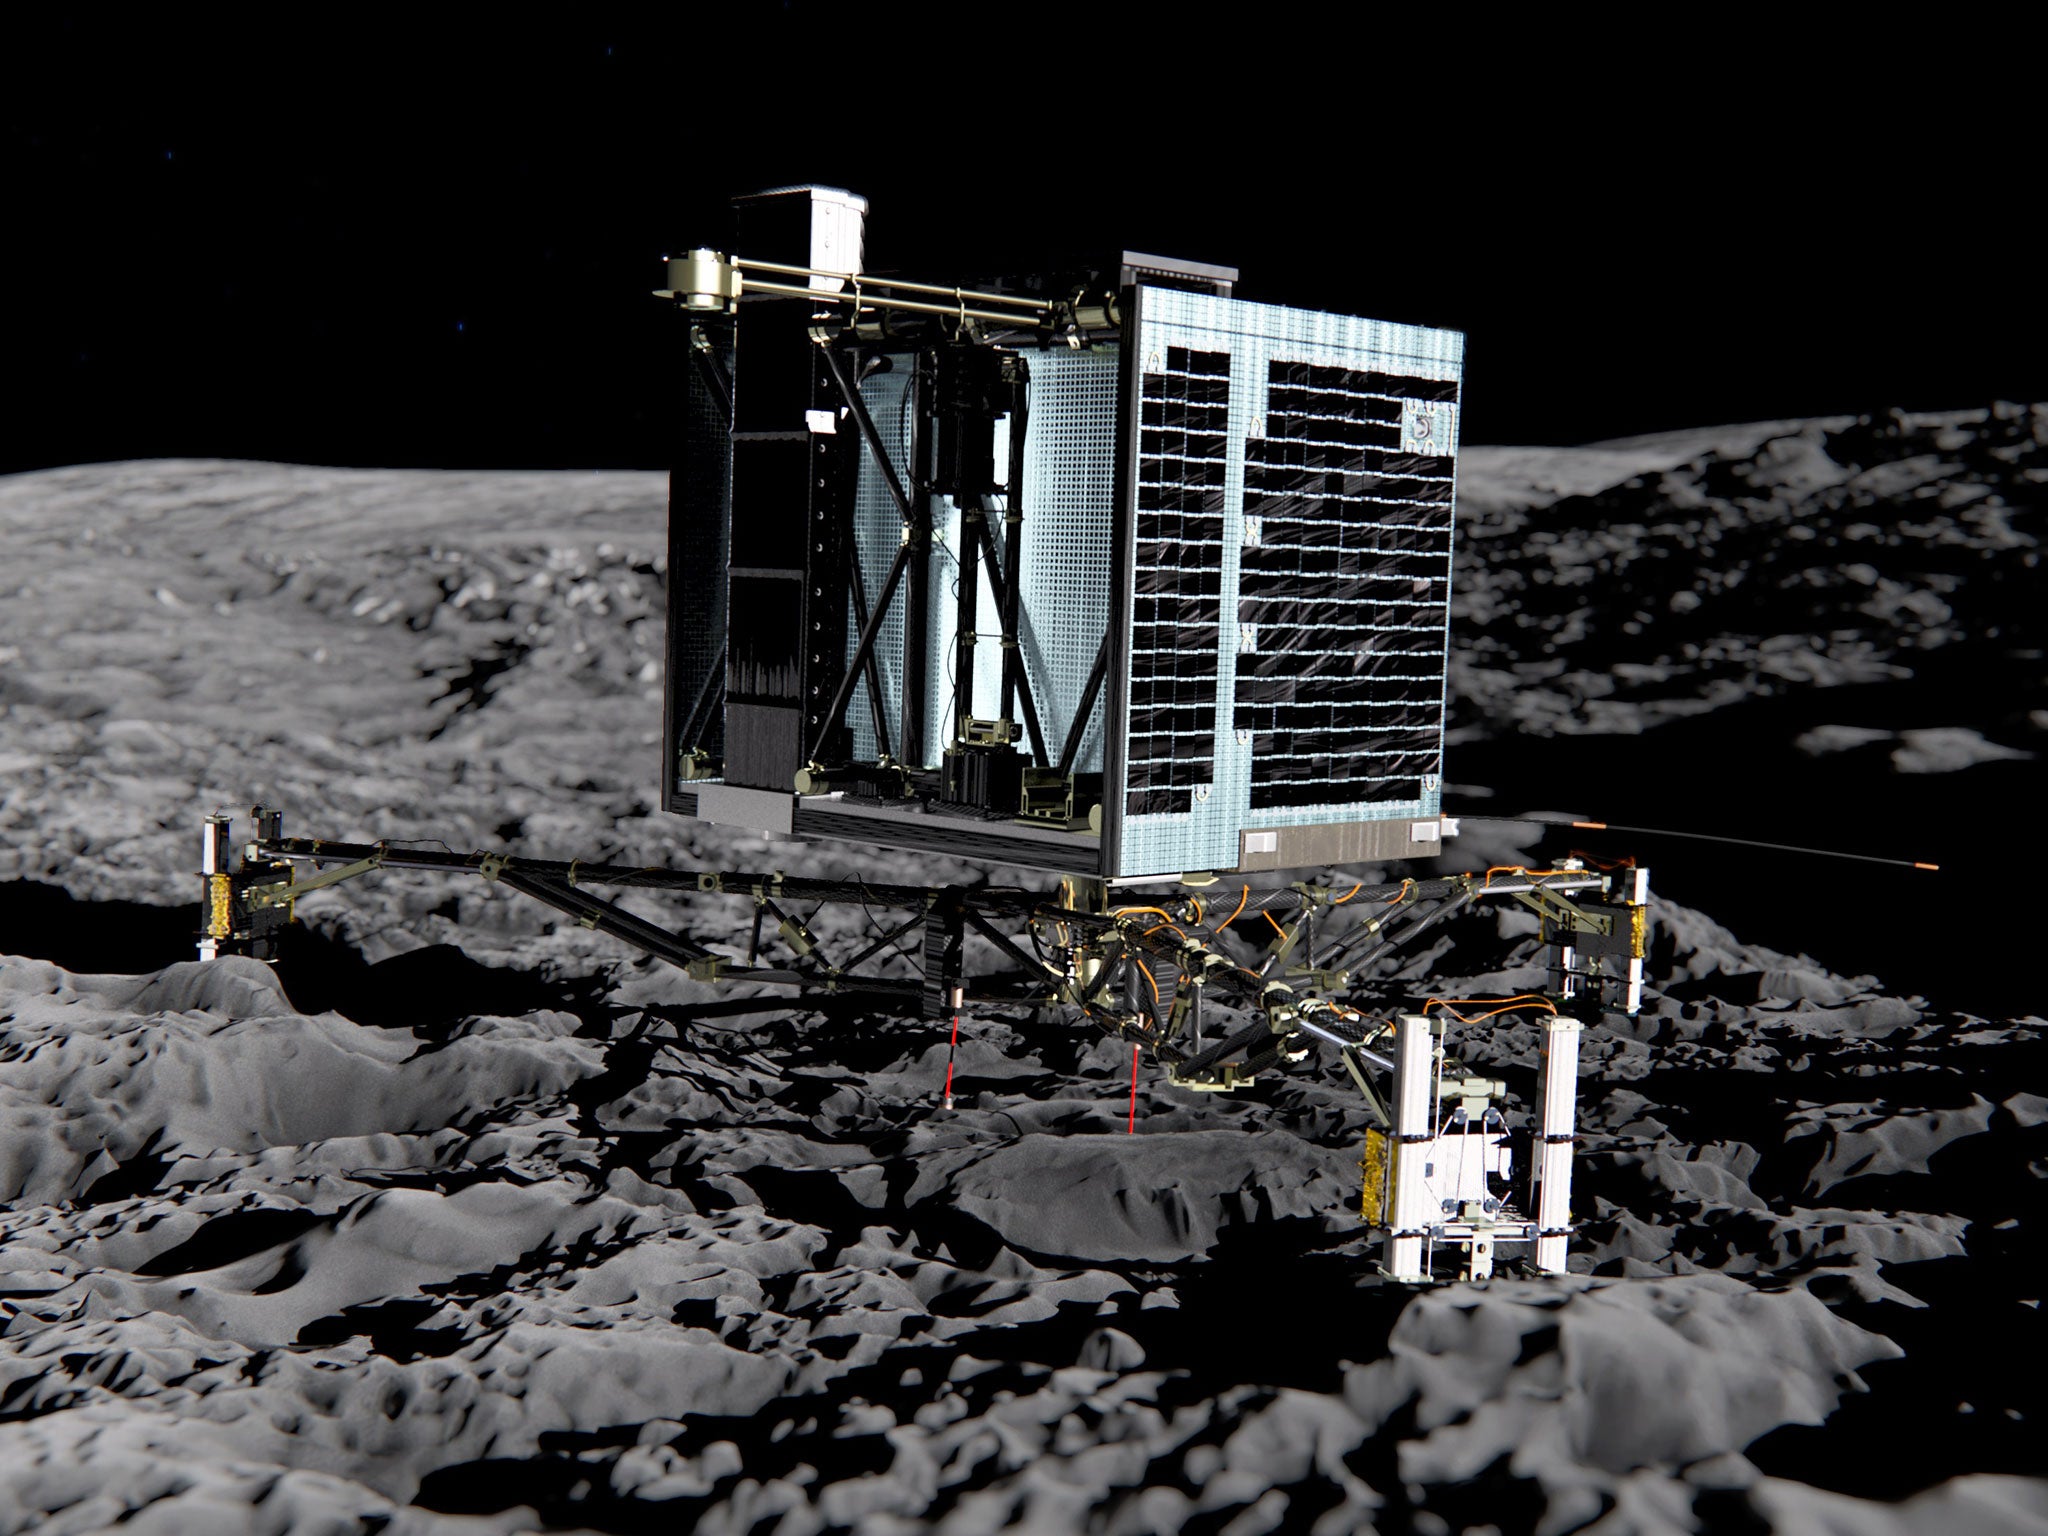 This photo shows an artist impression of Rosetta's lander Philae on the surface of comet